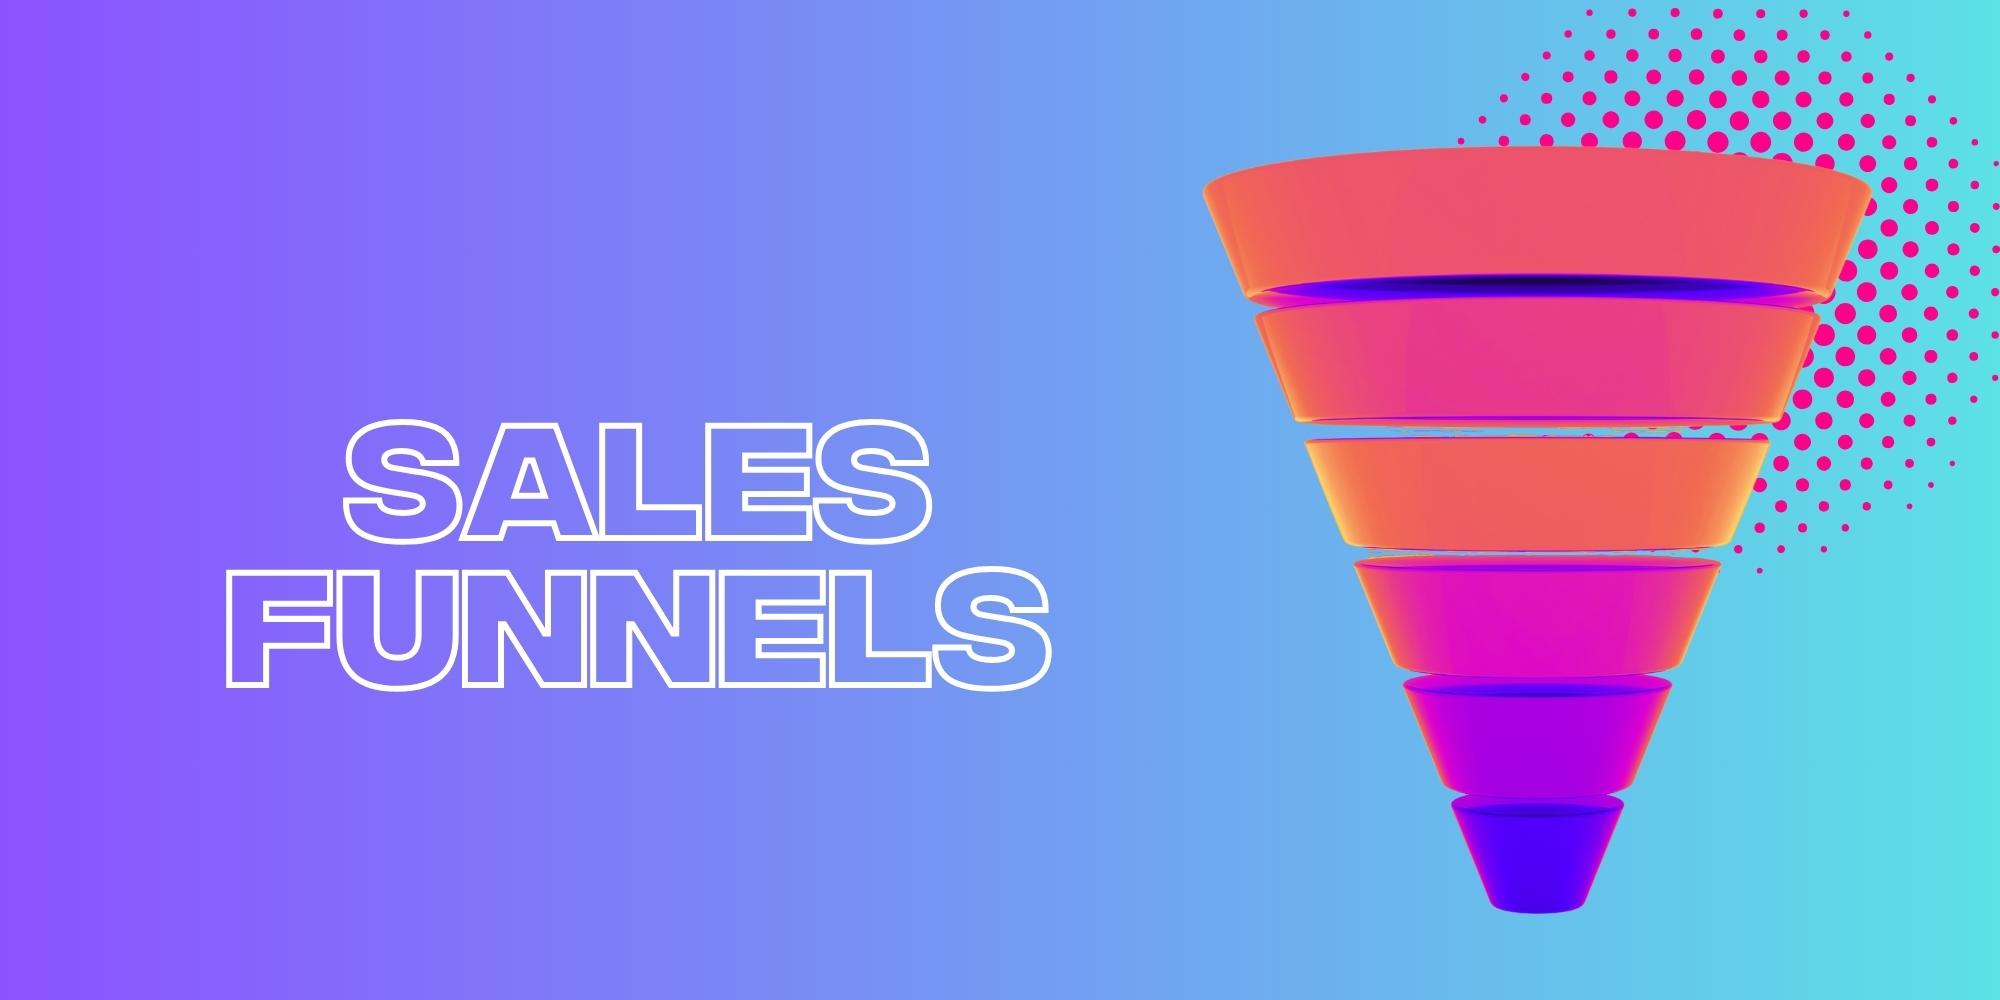 How To Build A Social Media Sales Funnel